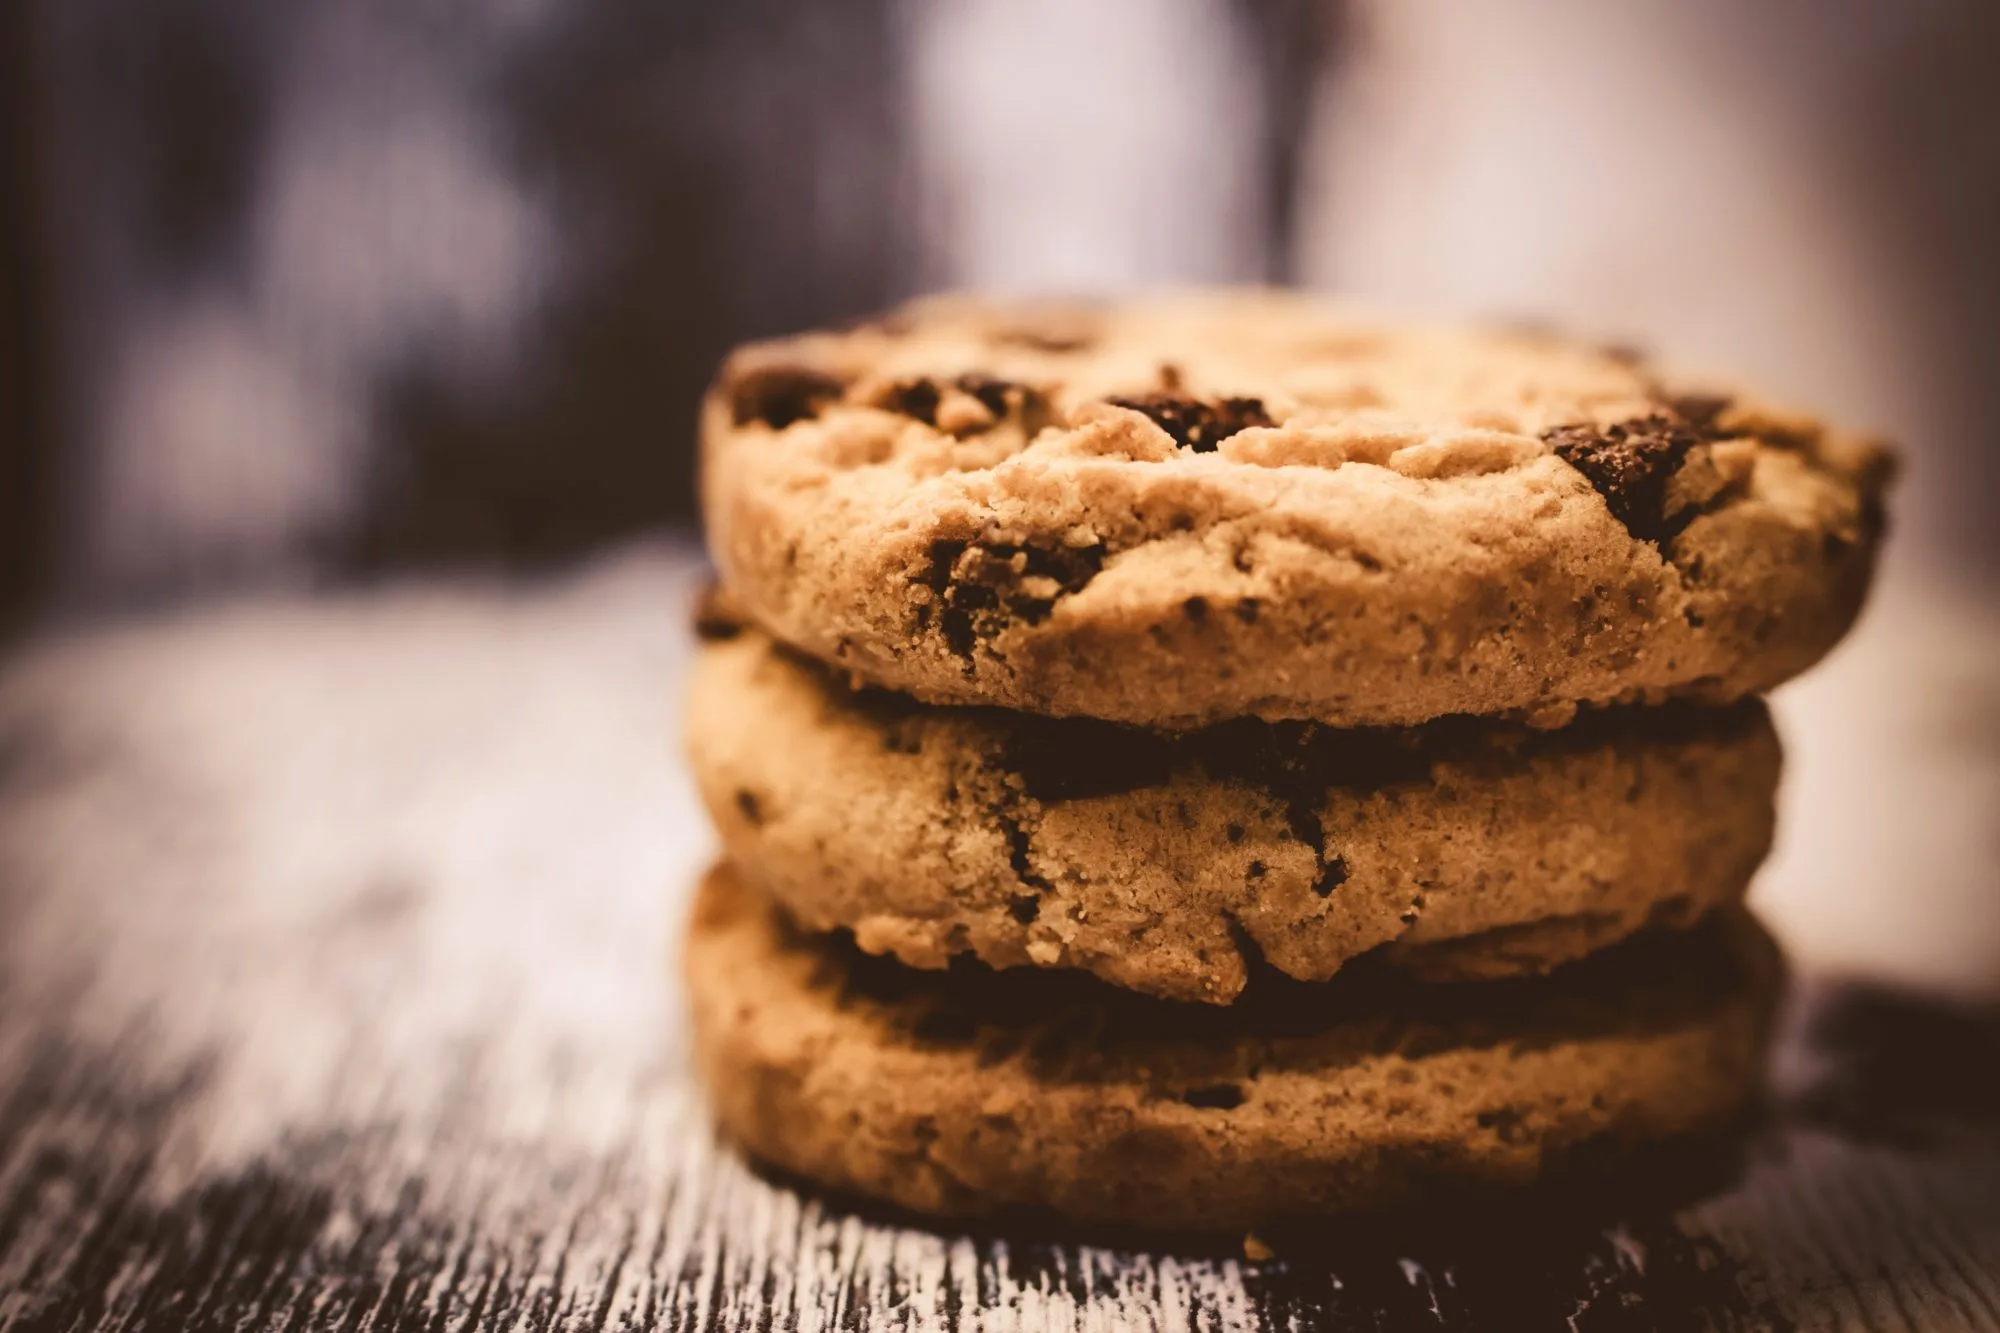 Chocolate Cookies Are Super Addictive. Here’s Why.